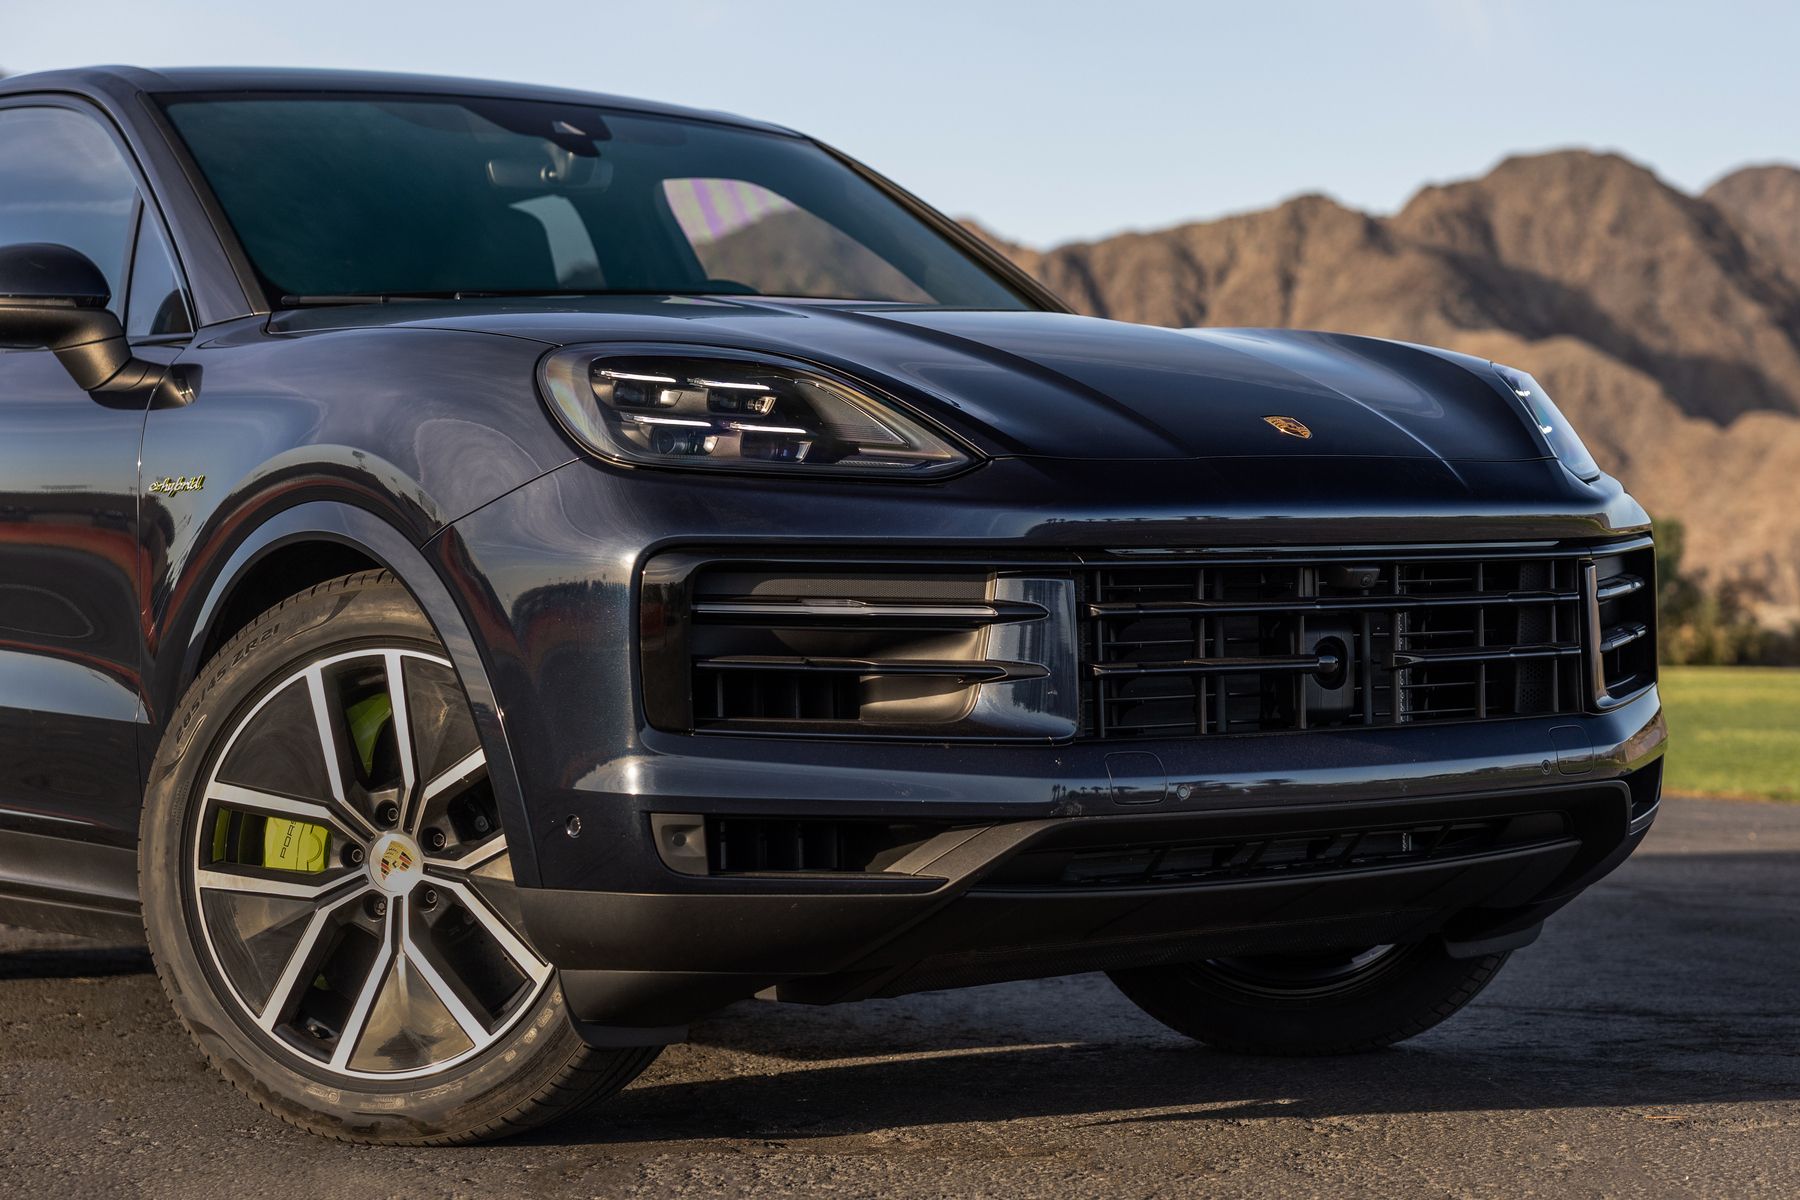 The Porsche Cayenne Turbo GT plays a numbers game